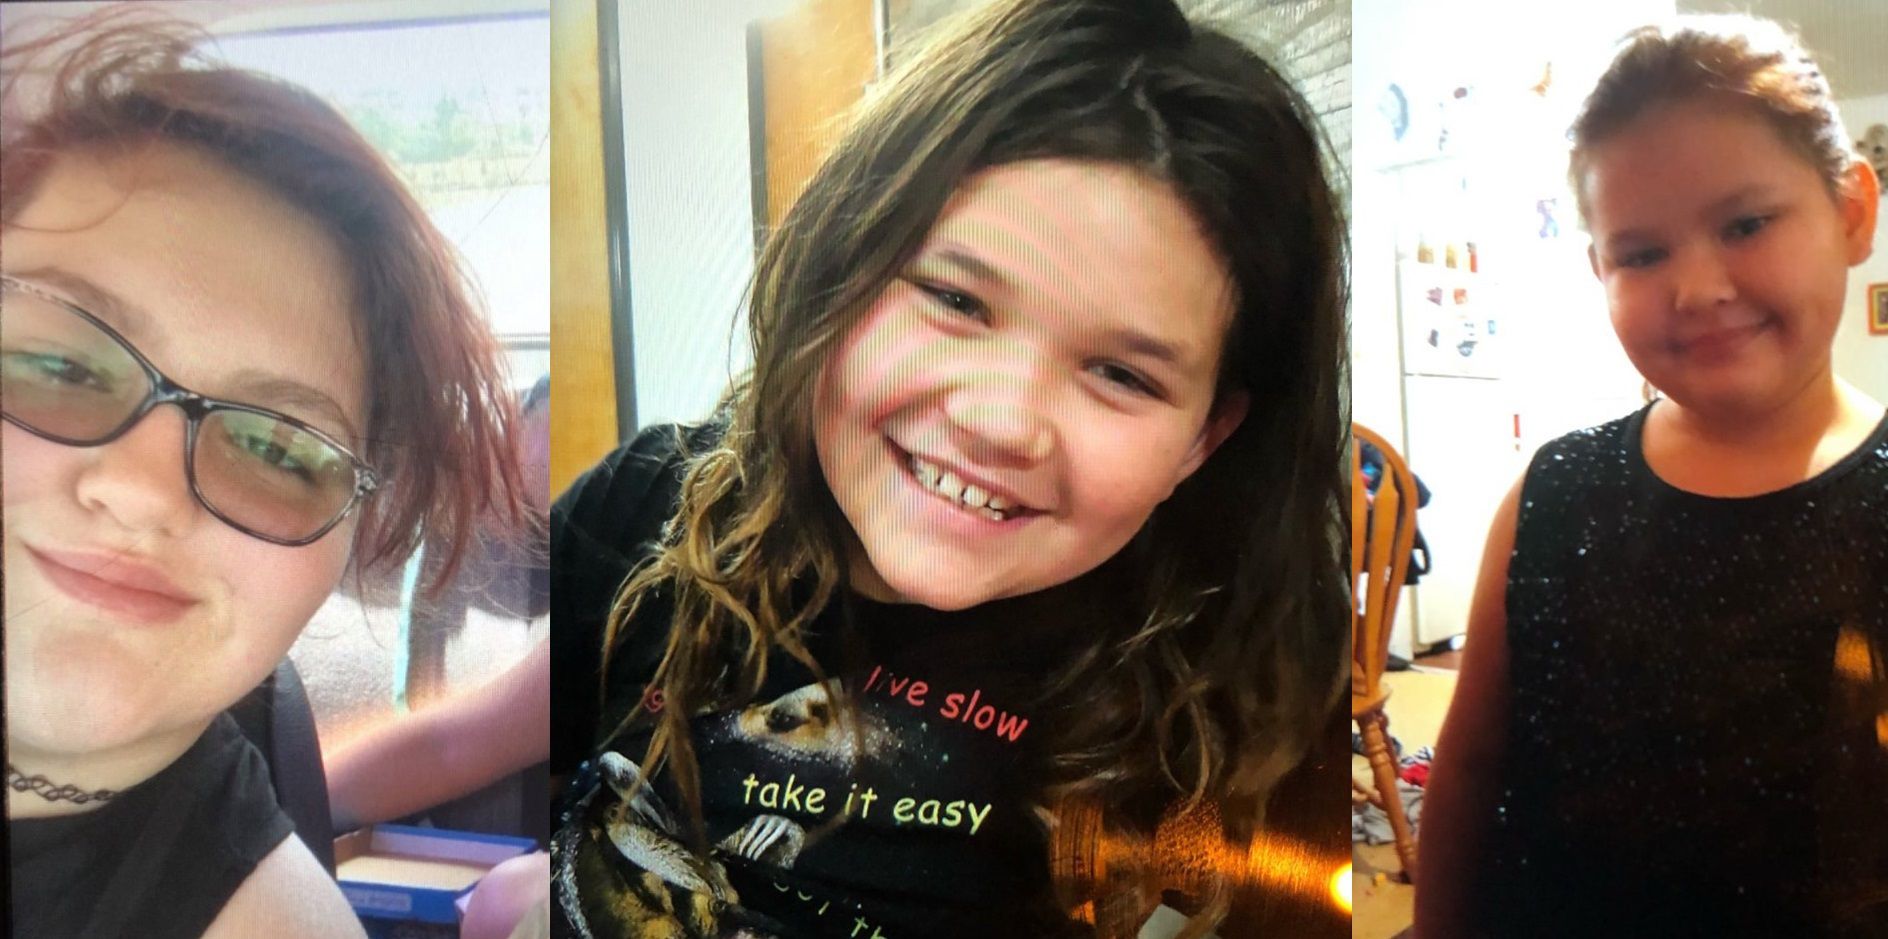 Missing cousins return home and are safe, says Aurora Police Department